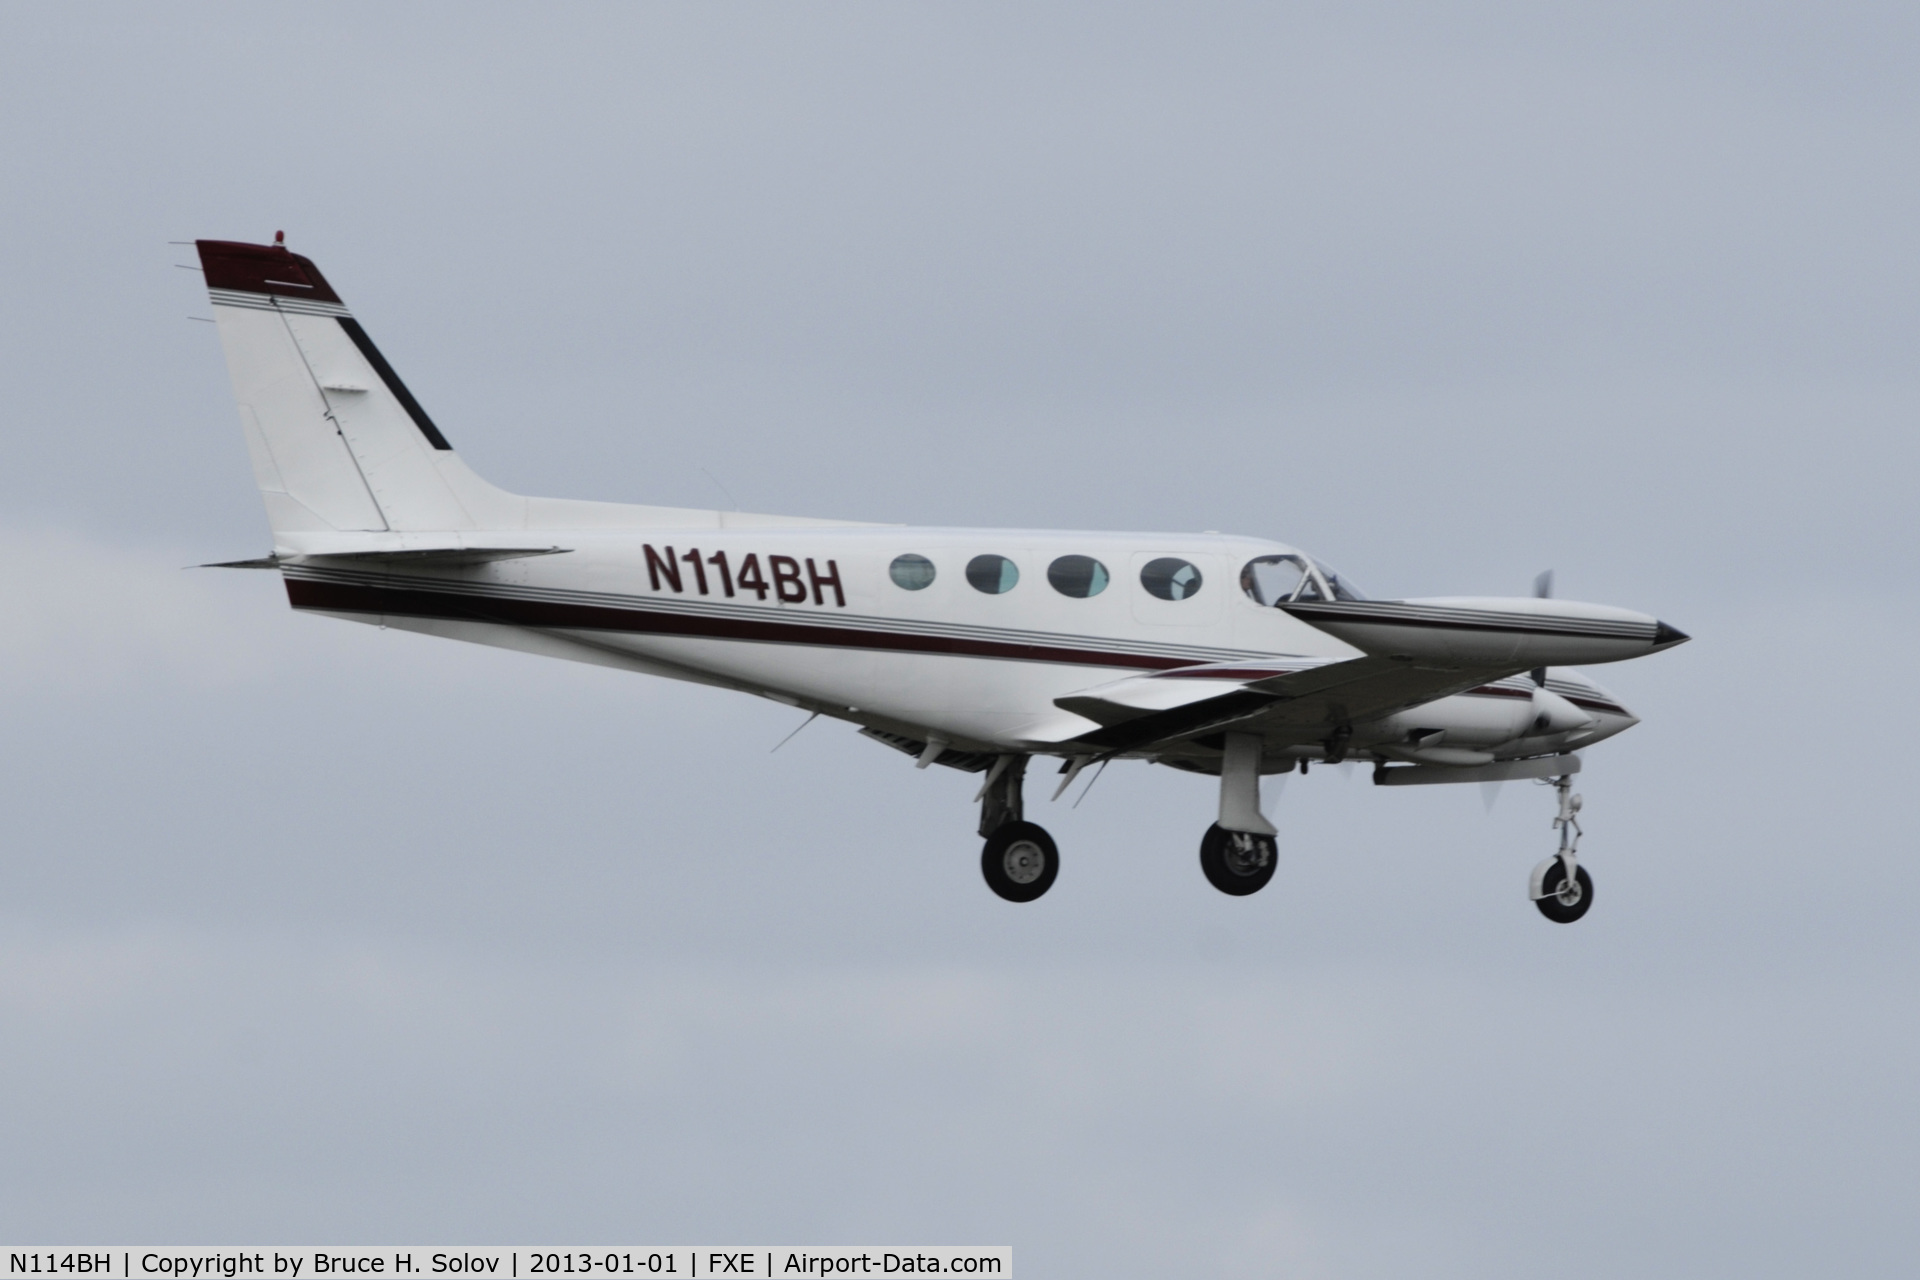 N114BH, 1981 Cessna 340A C/N 340A1230, Completed run-up for takeoff at runway 8